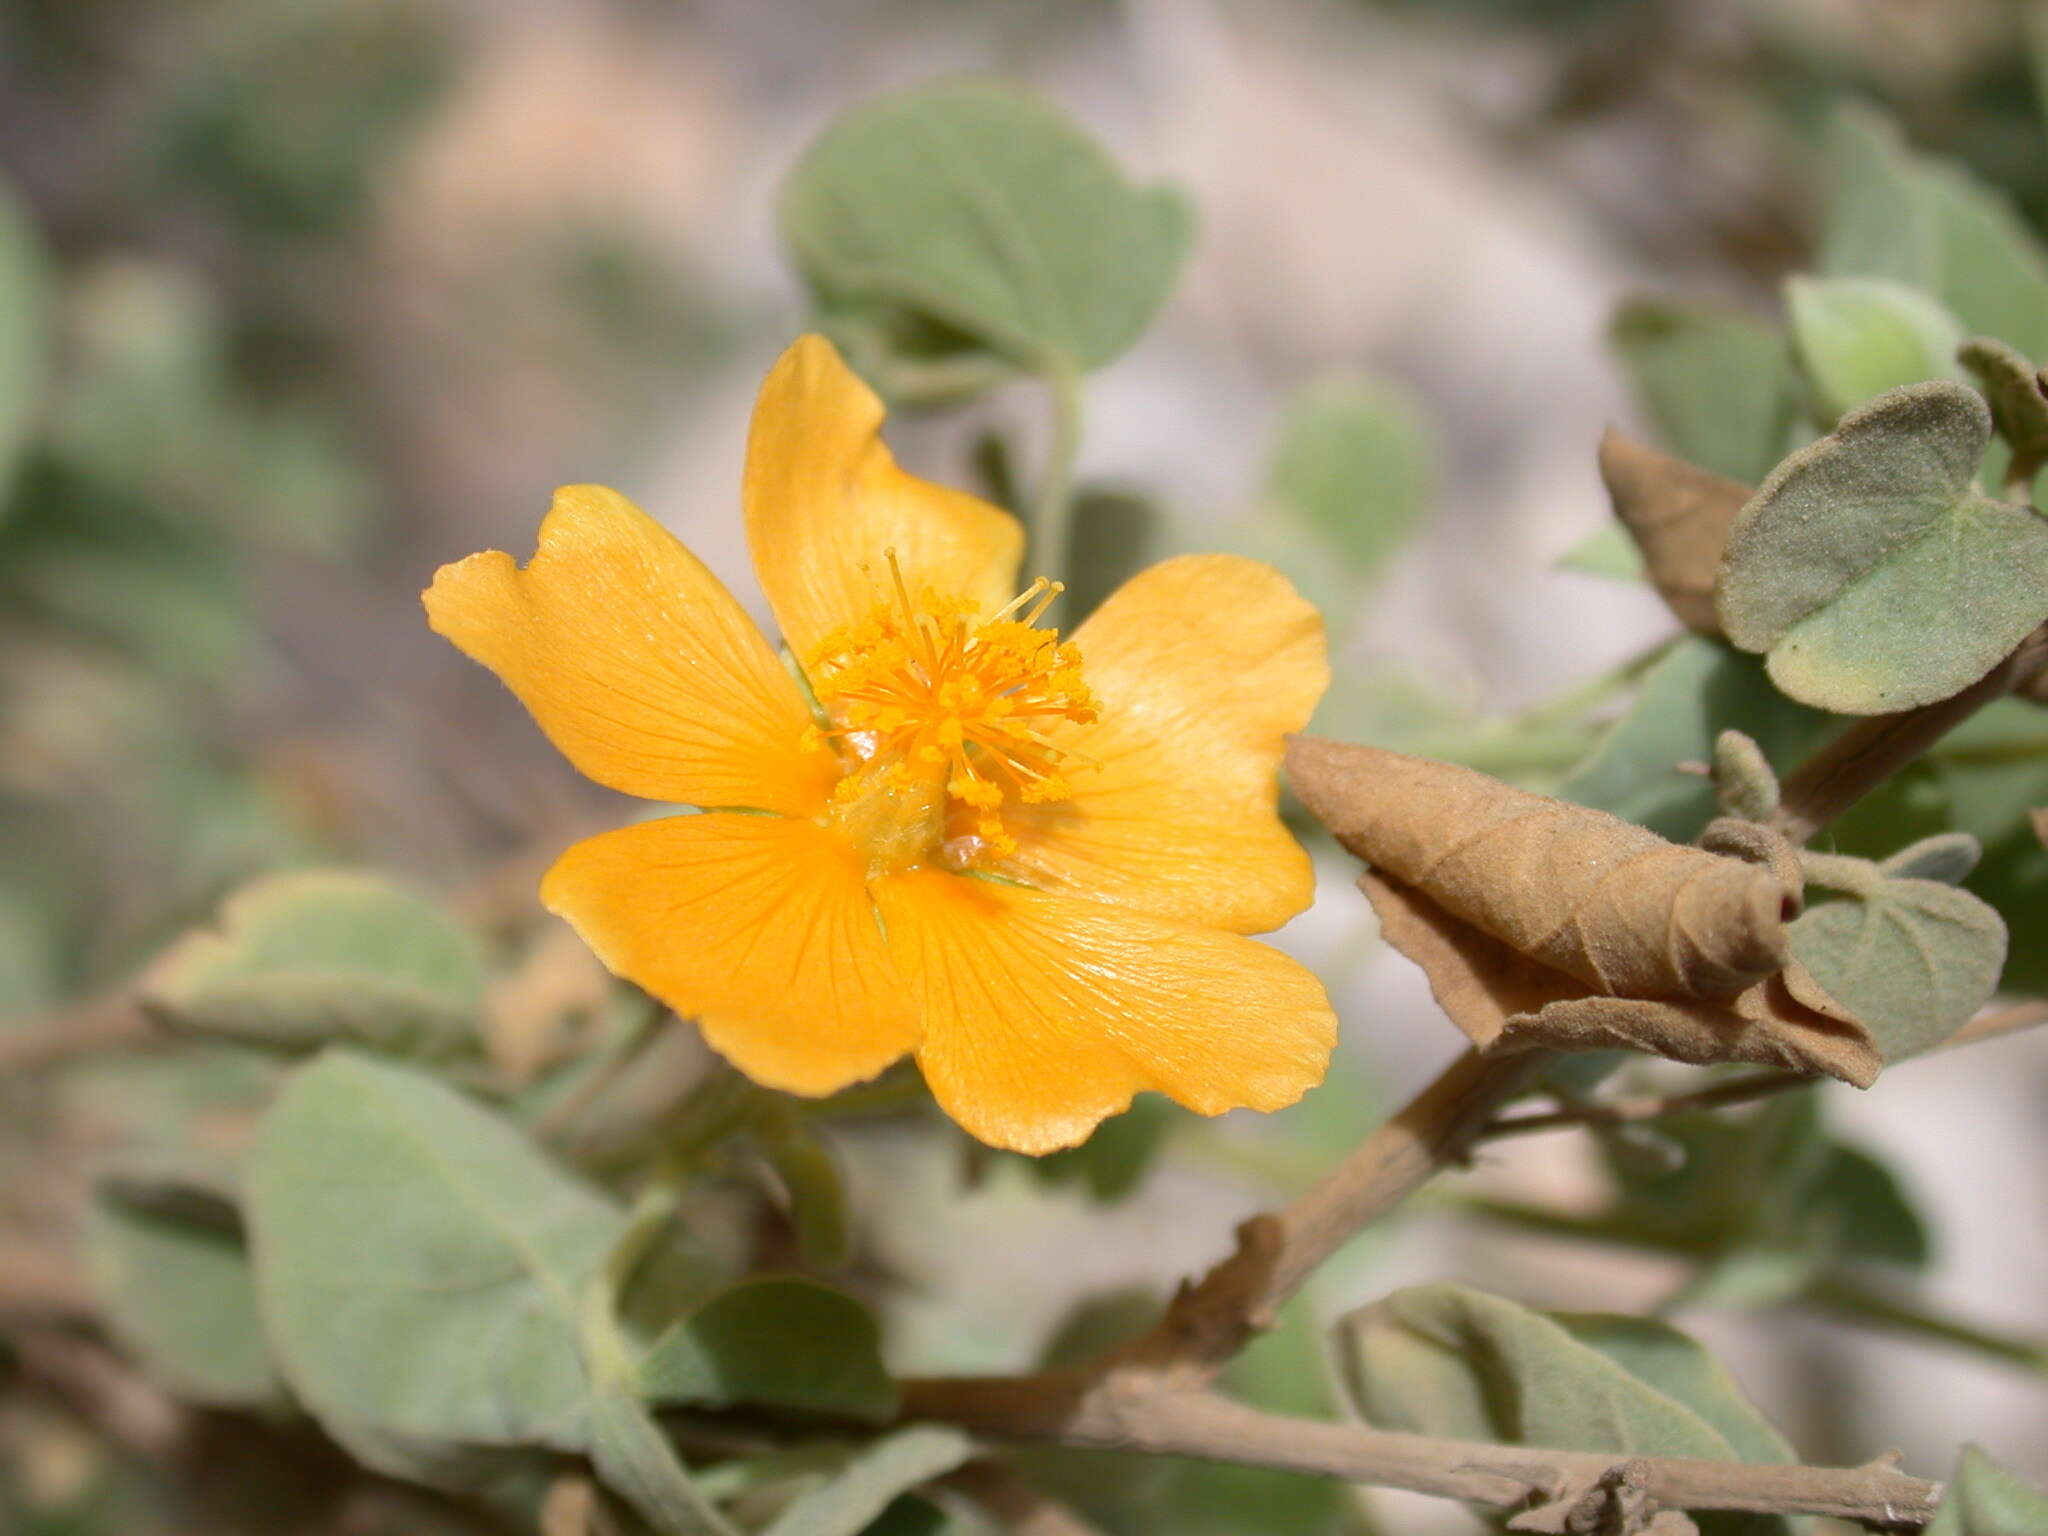 Image of Texas Indian mallow